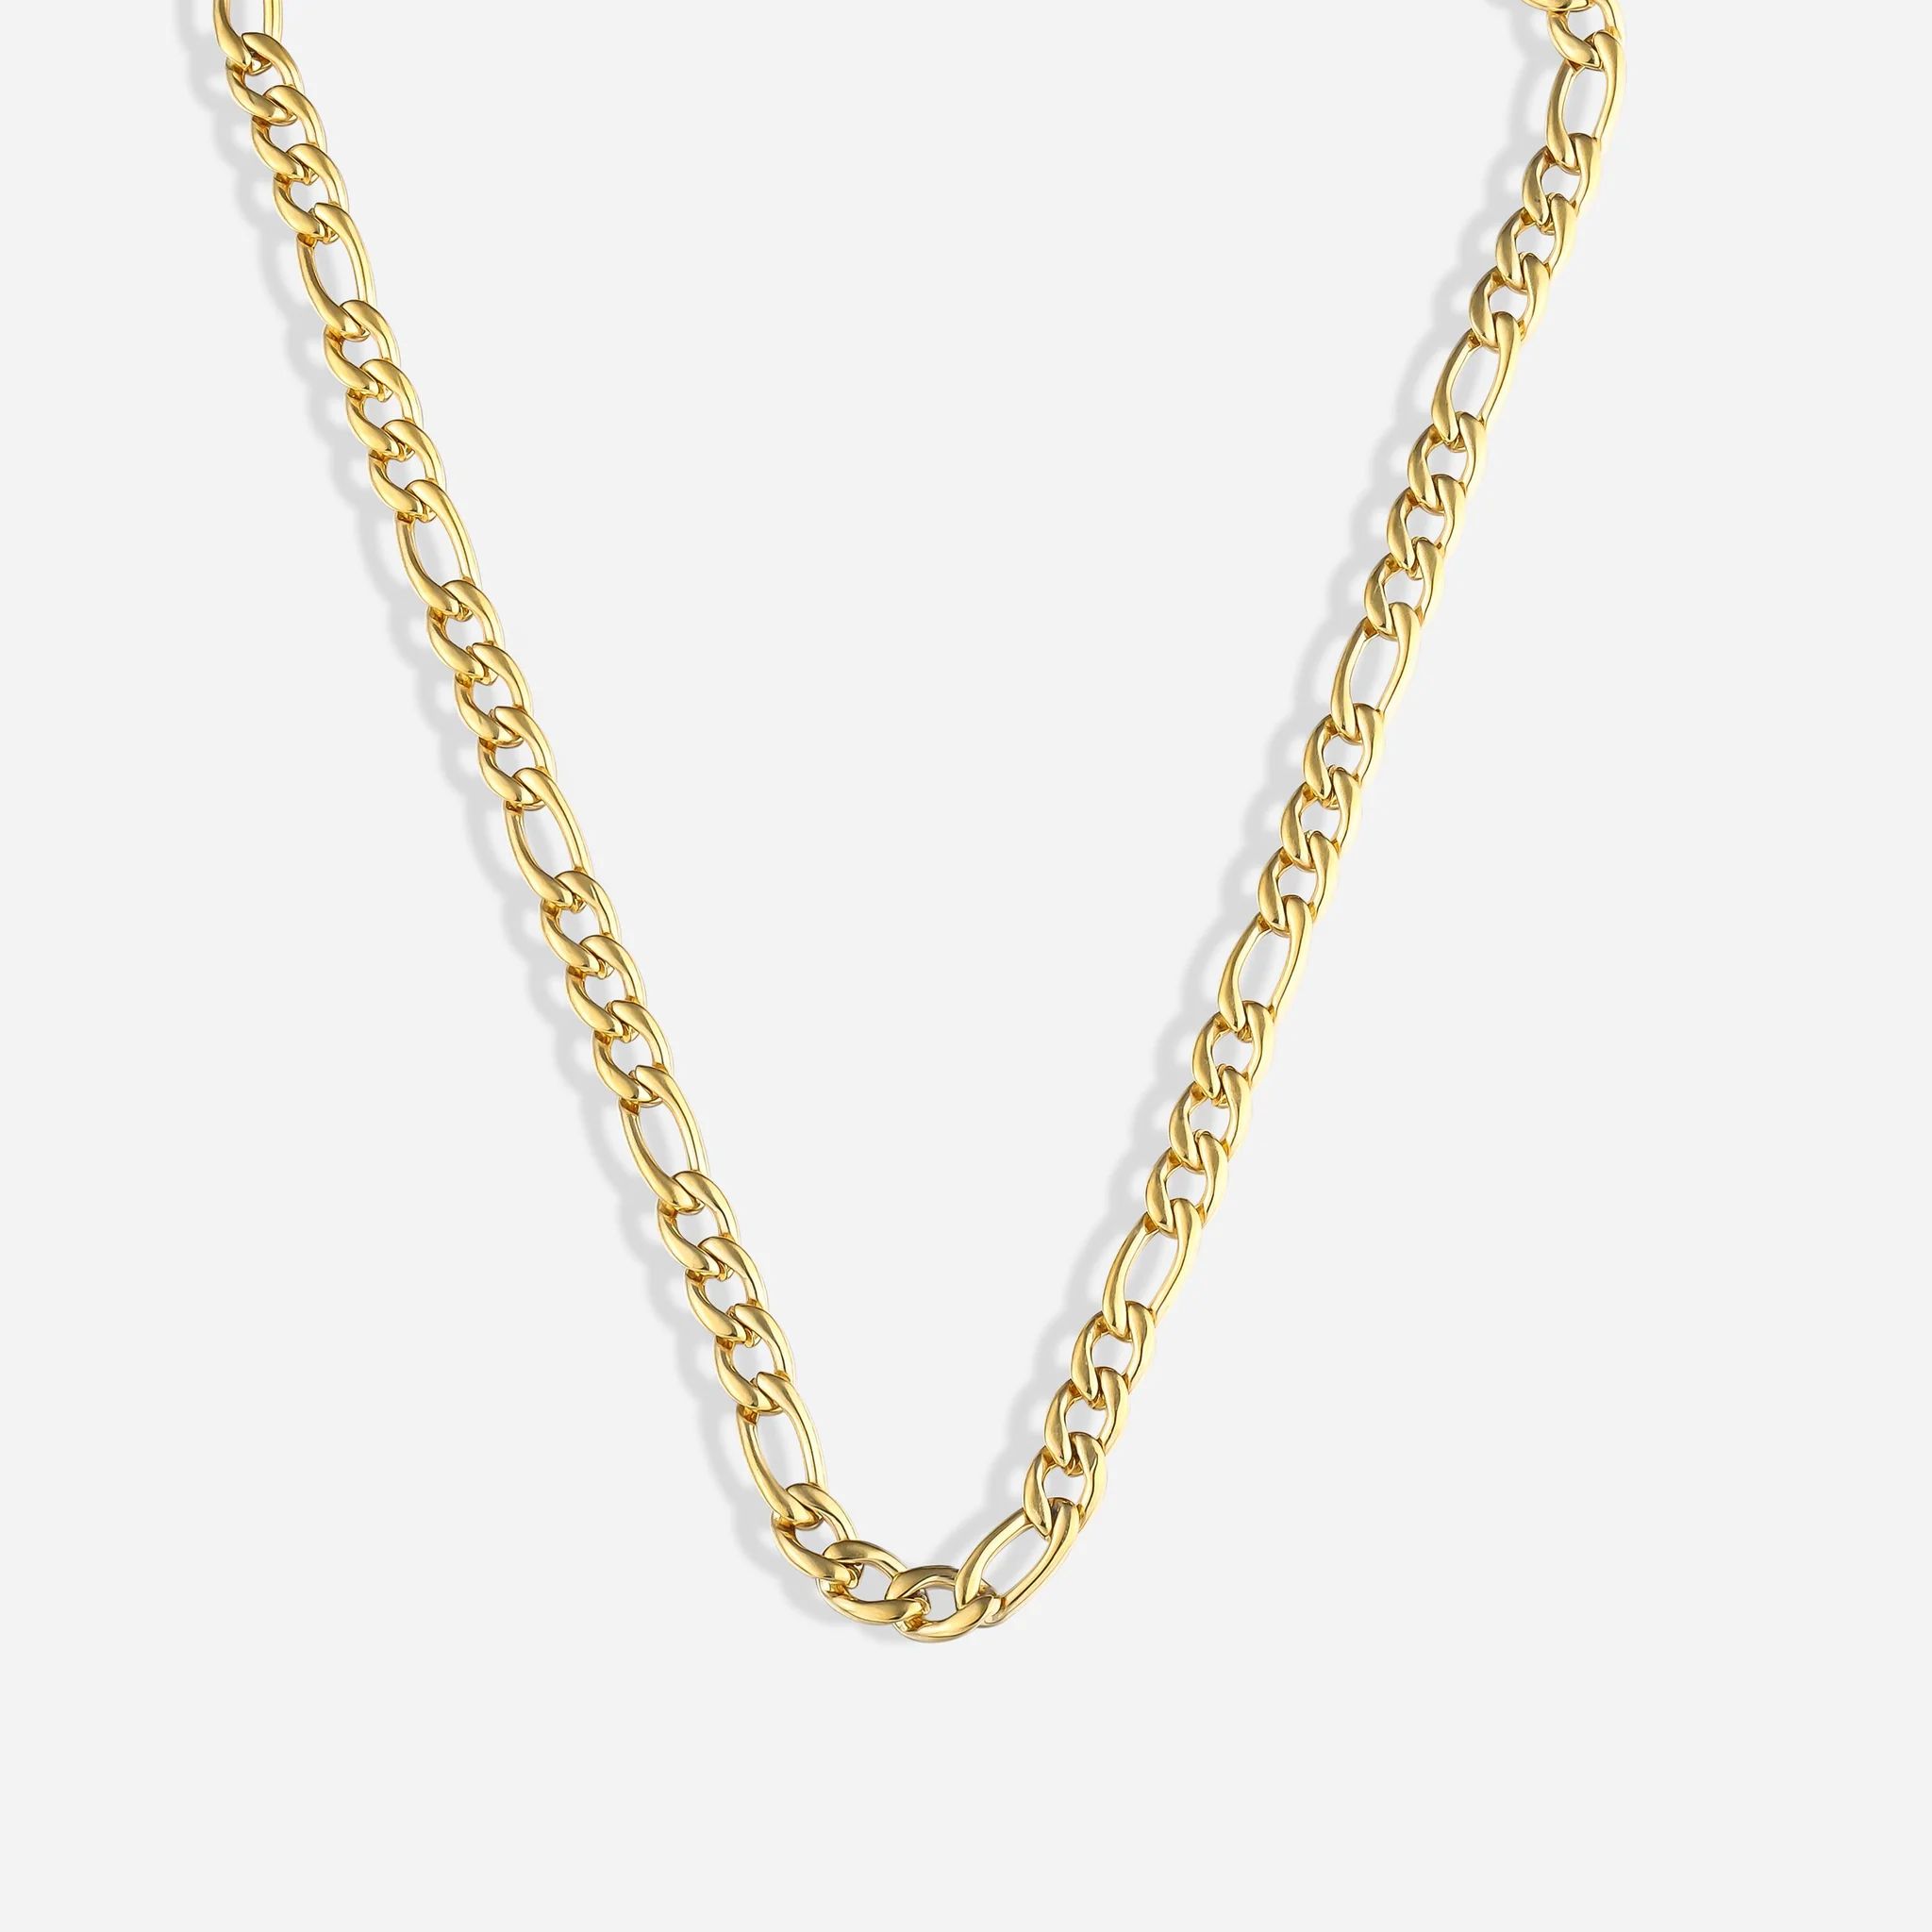 Everly Necklace | Victoria Emerson